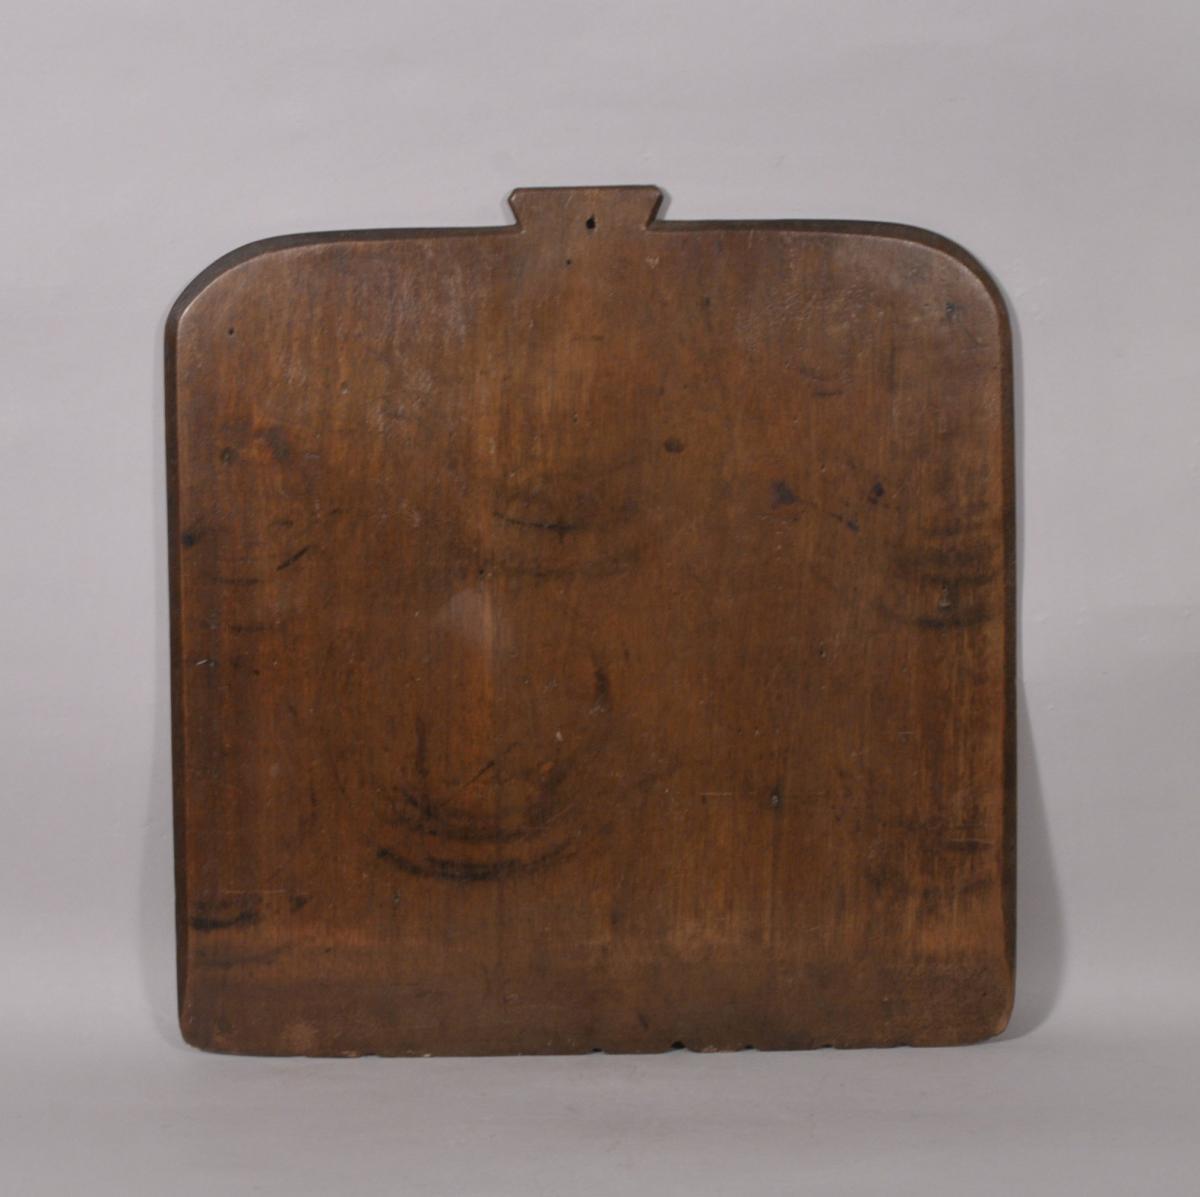 S/5806 Antique Treen Late 18th Century Walnut Riddle Board